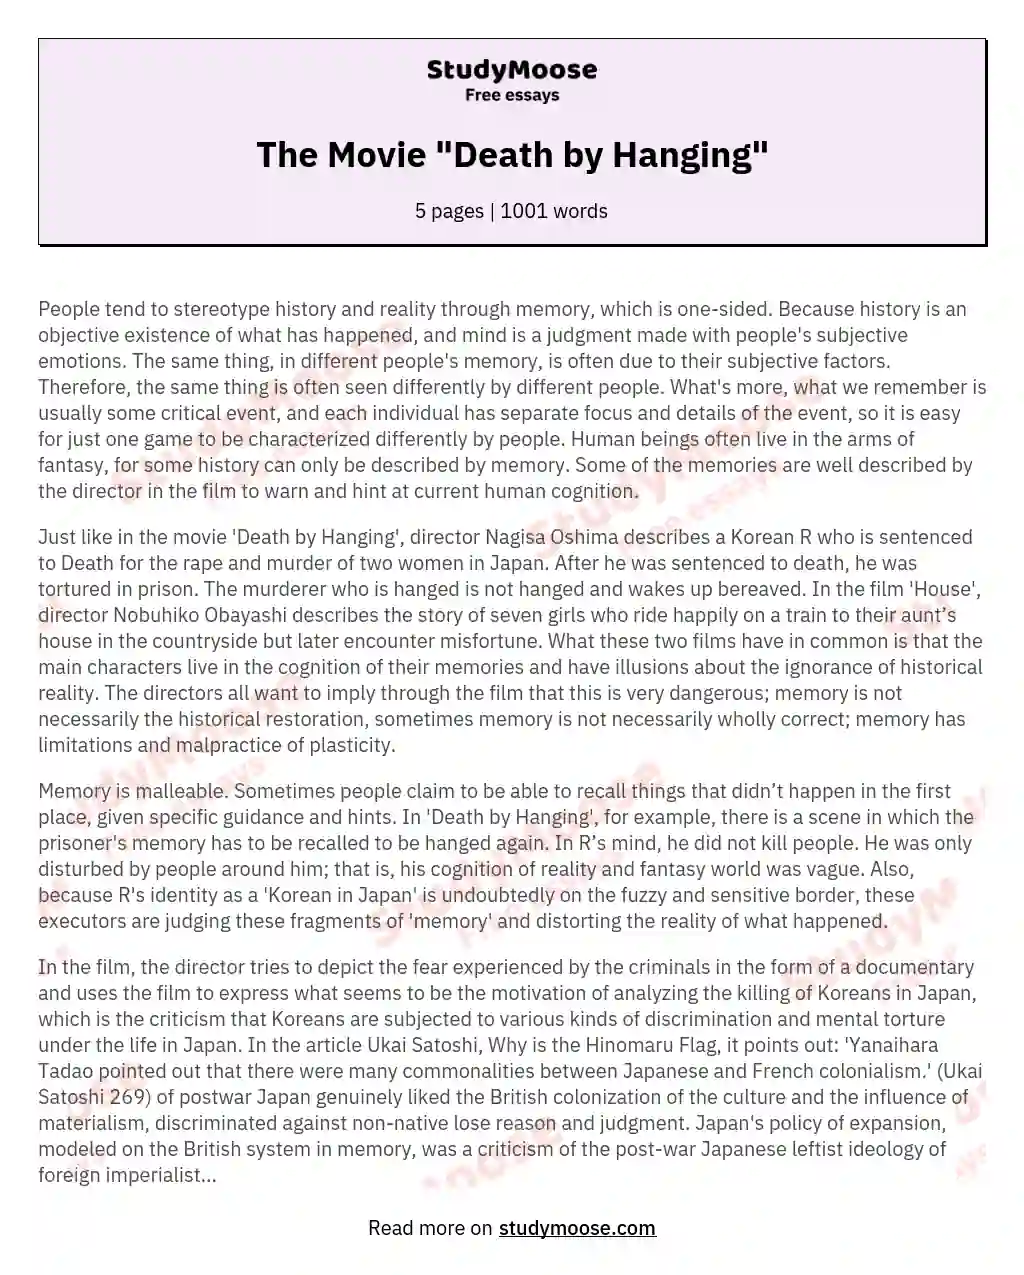 The Movie "Death by Hanging" essay